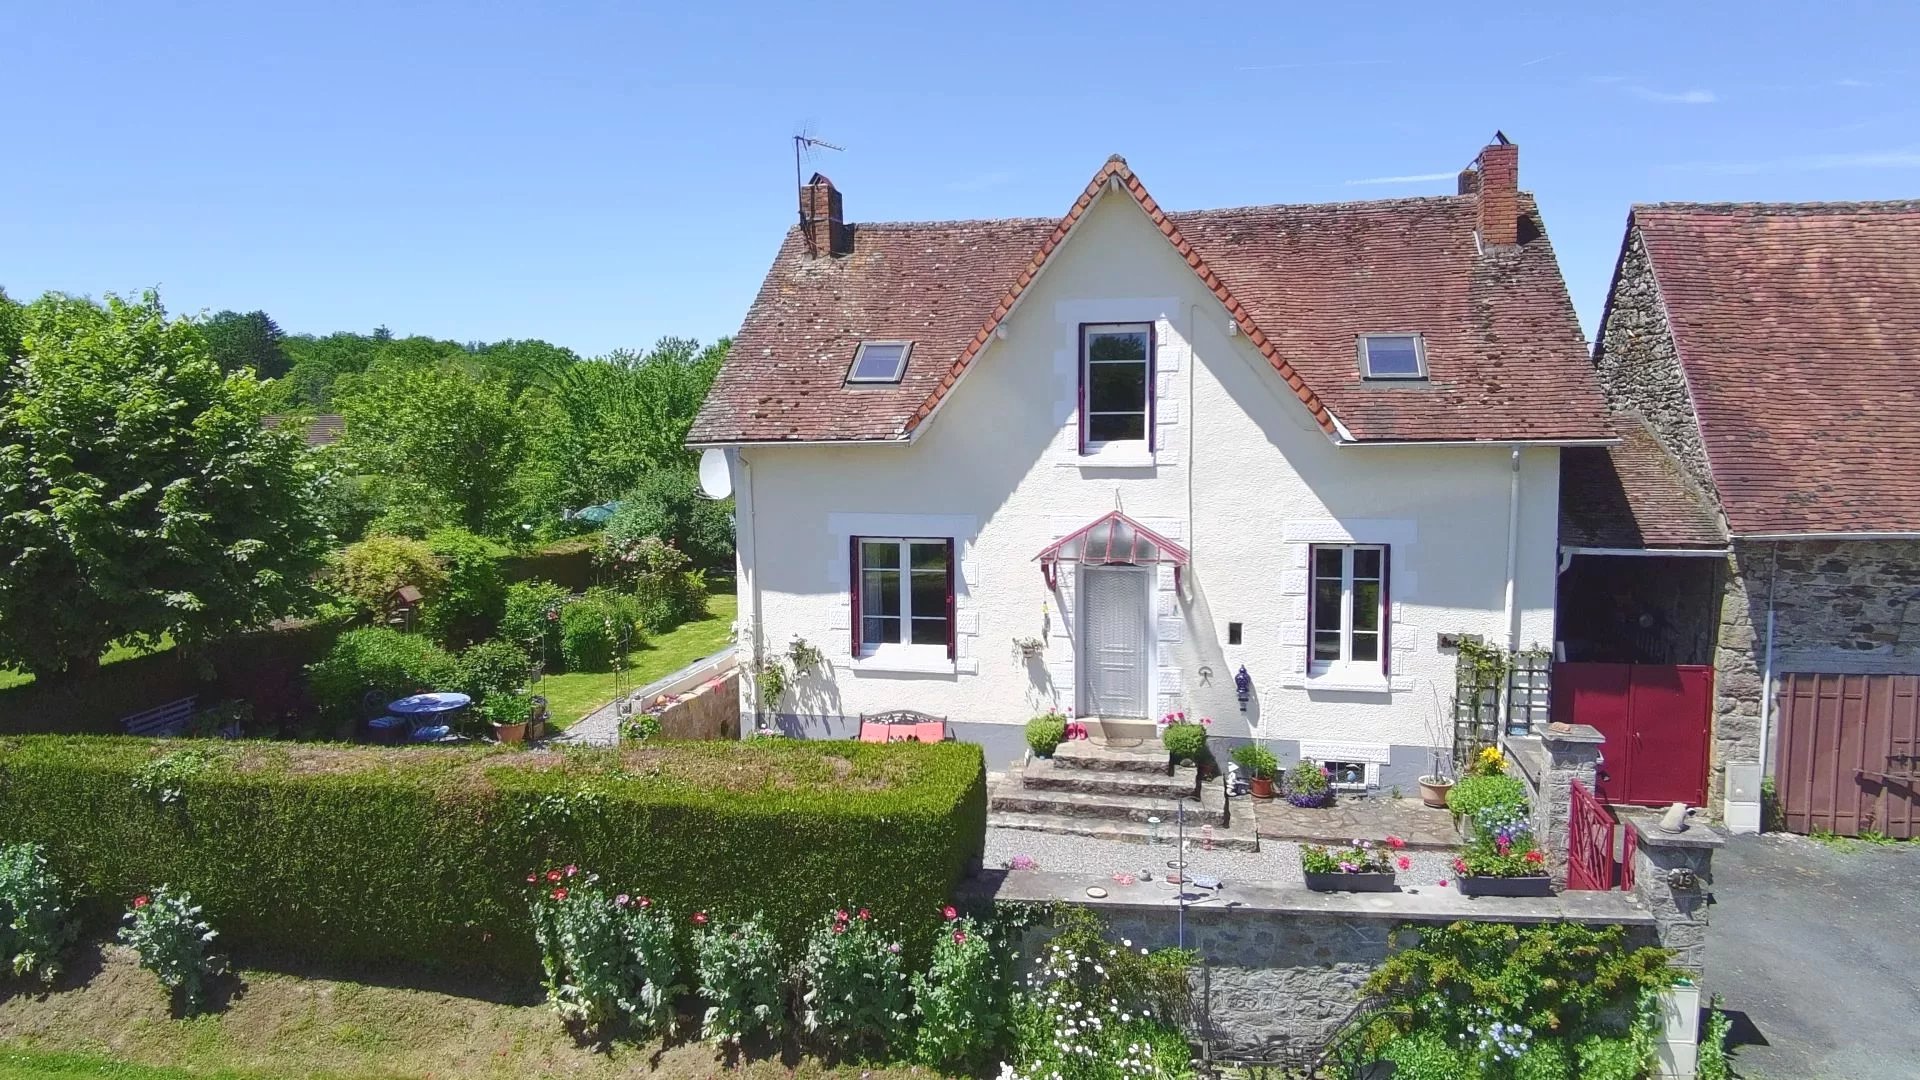 Impressive 4 bedroom property in tranquil location